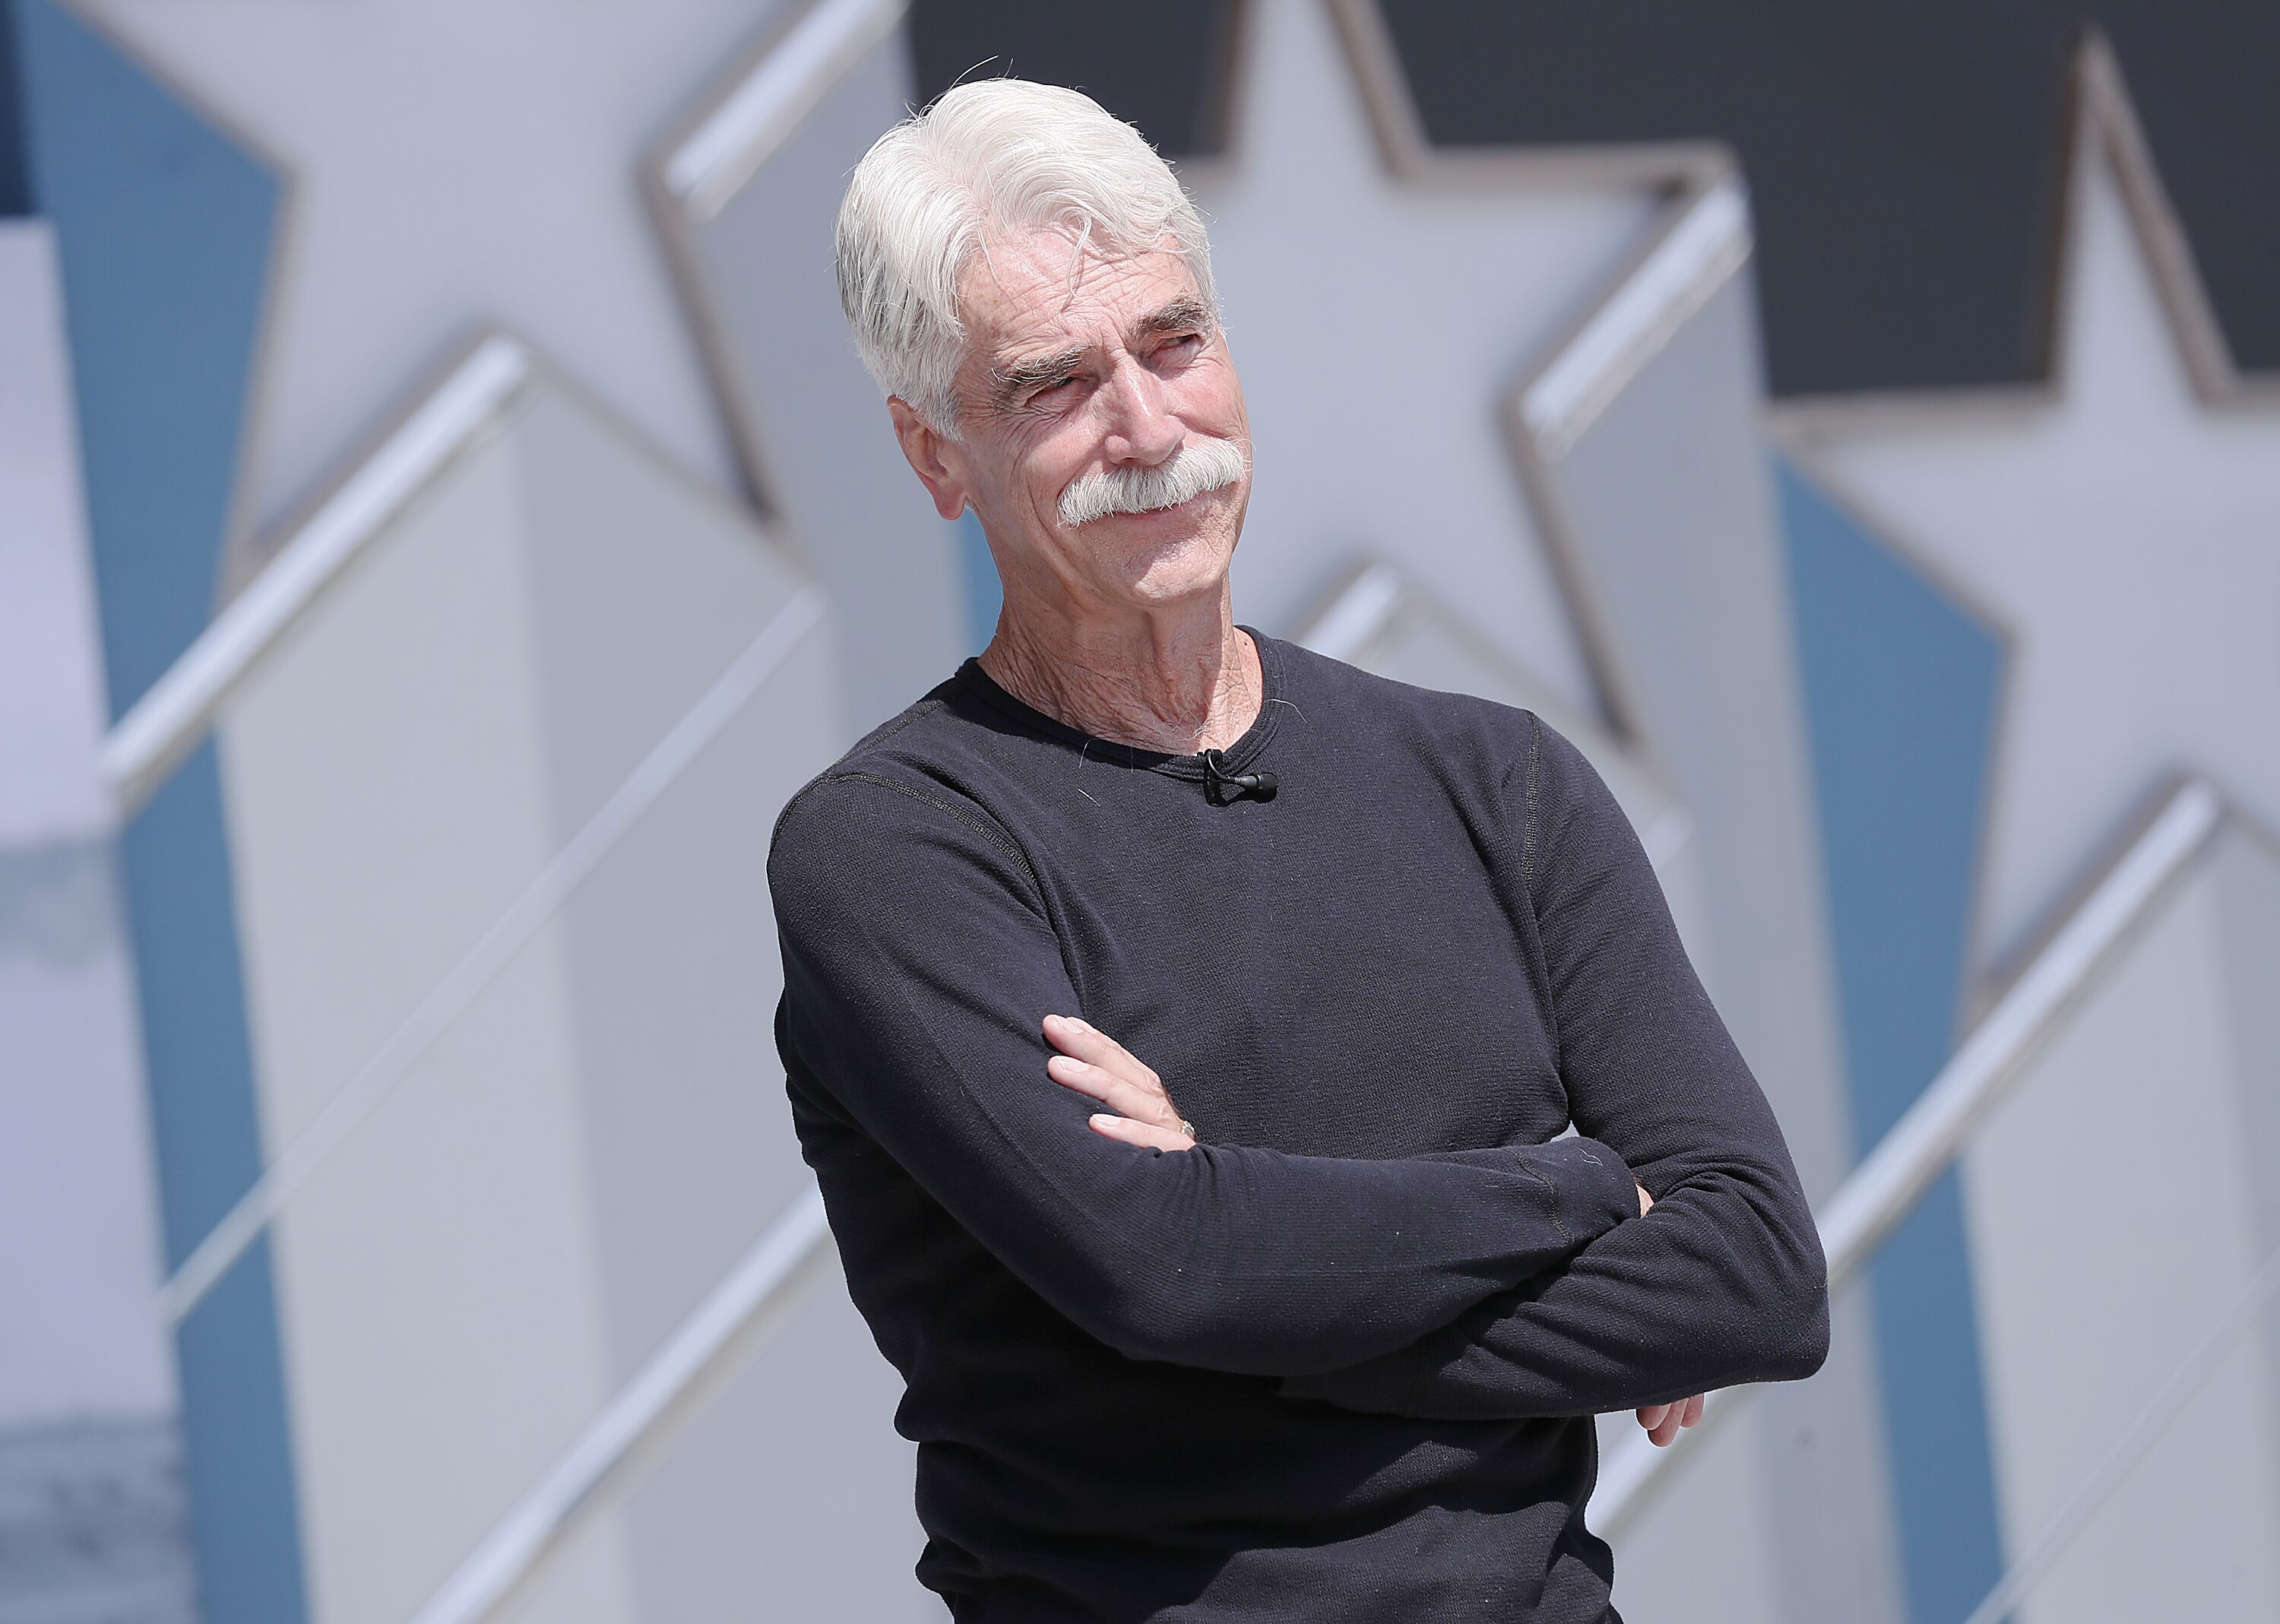 Sam Elliott at the National Memorial Day Concert - Rehearsals on May 25, 2019 | Photo: Getty Images